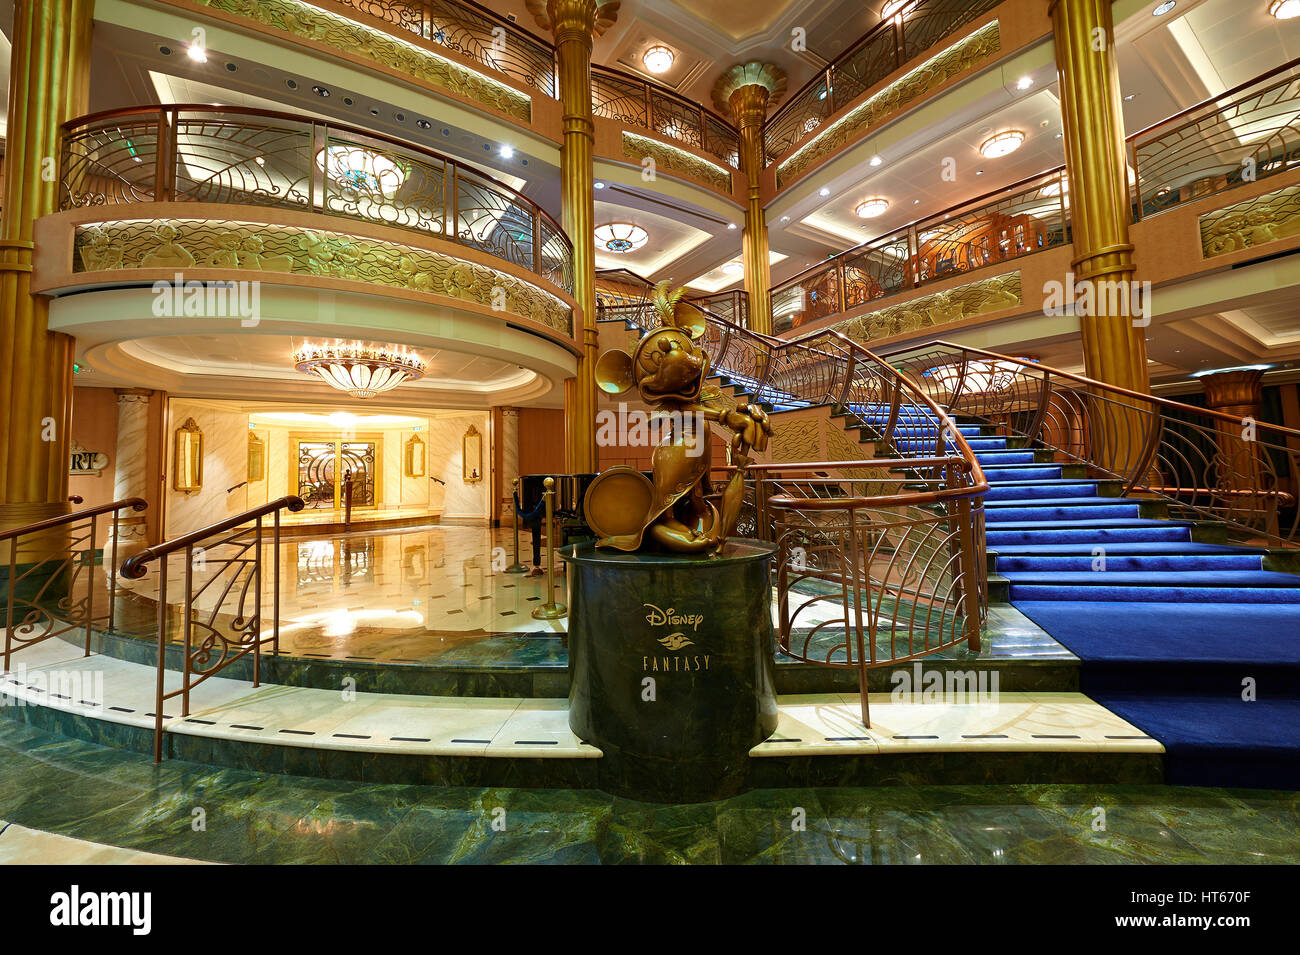 Orlando, USA - April 27, 2015: Interior of main hall in disney cruise ship. Statue of Minnie mouse in disney ship Stock Photo